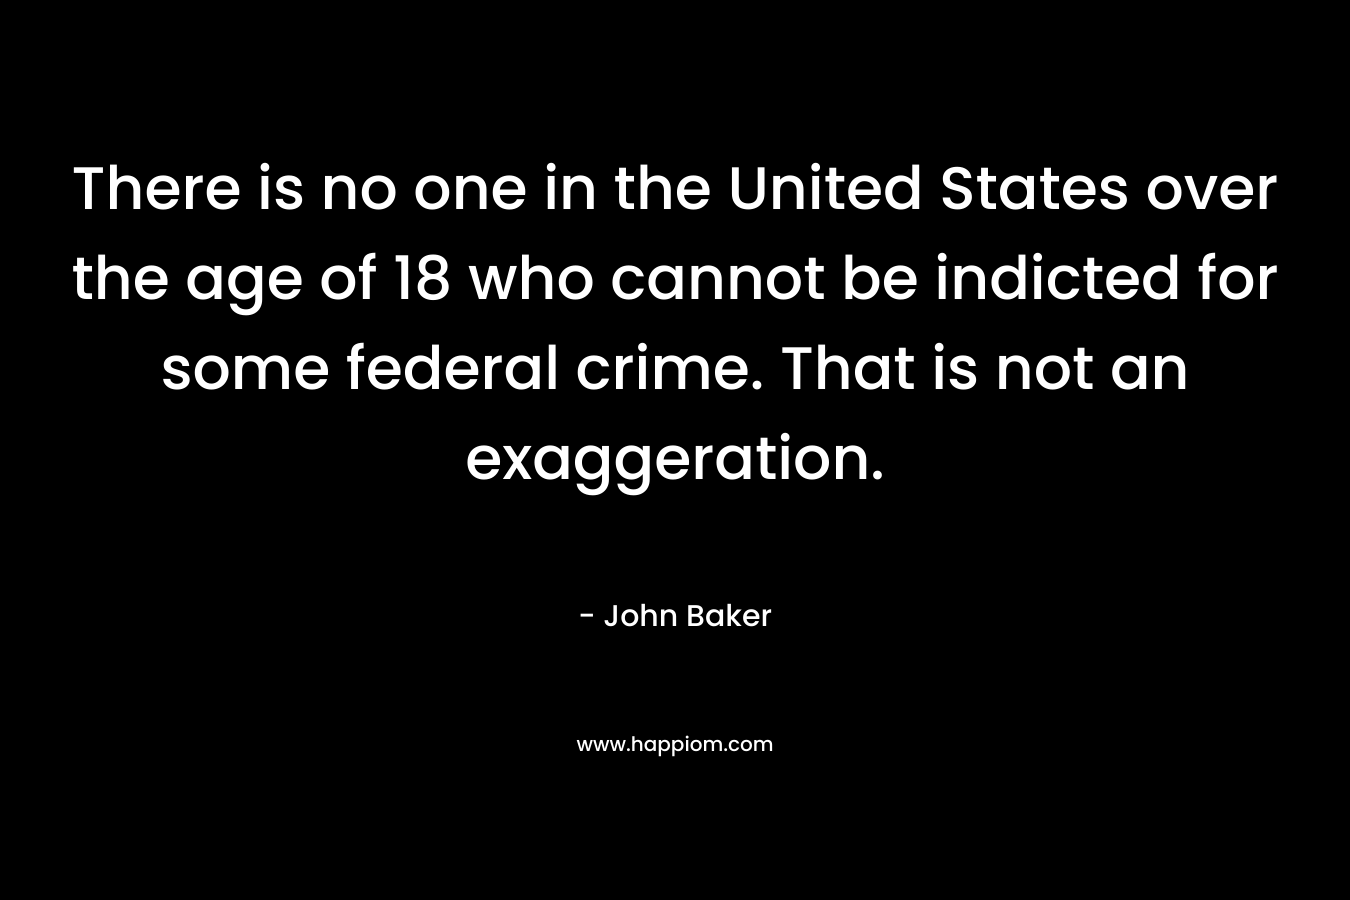 There is no one in the United States over the age of 18 who cannot be indicted for some federal crime. That is not an exaggeration. – John Baker